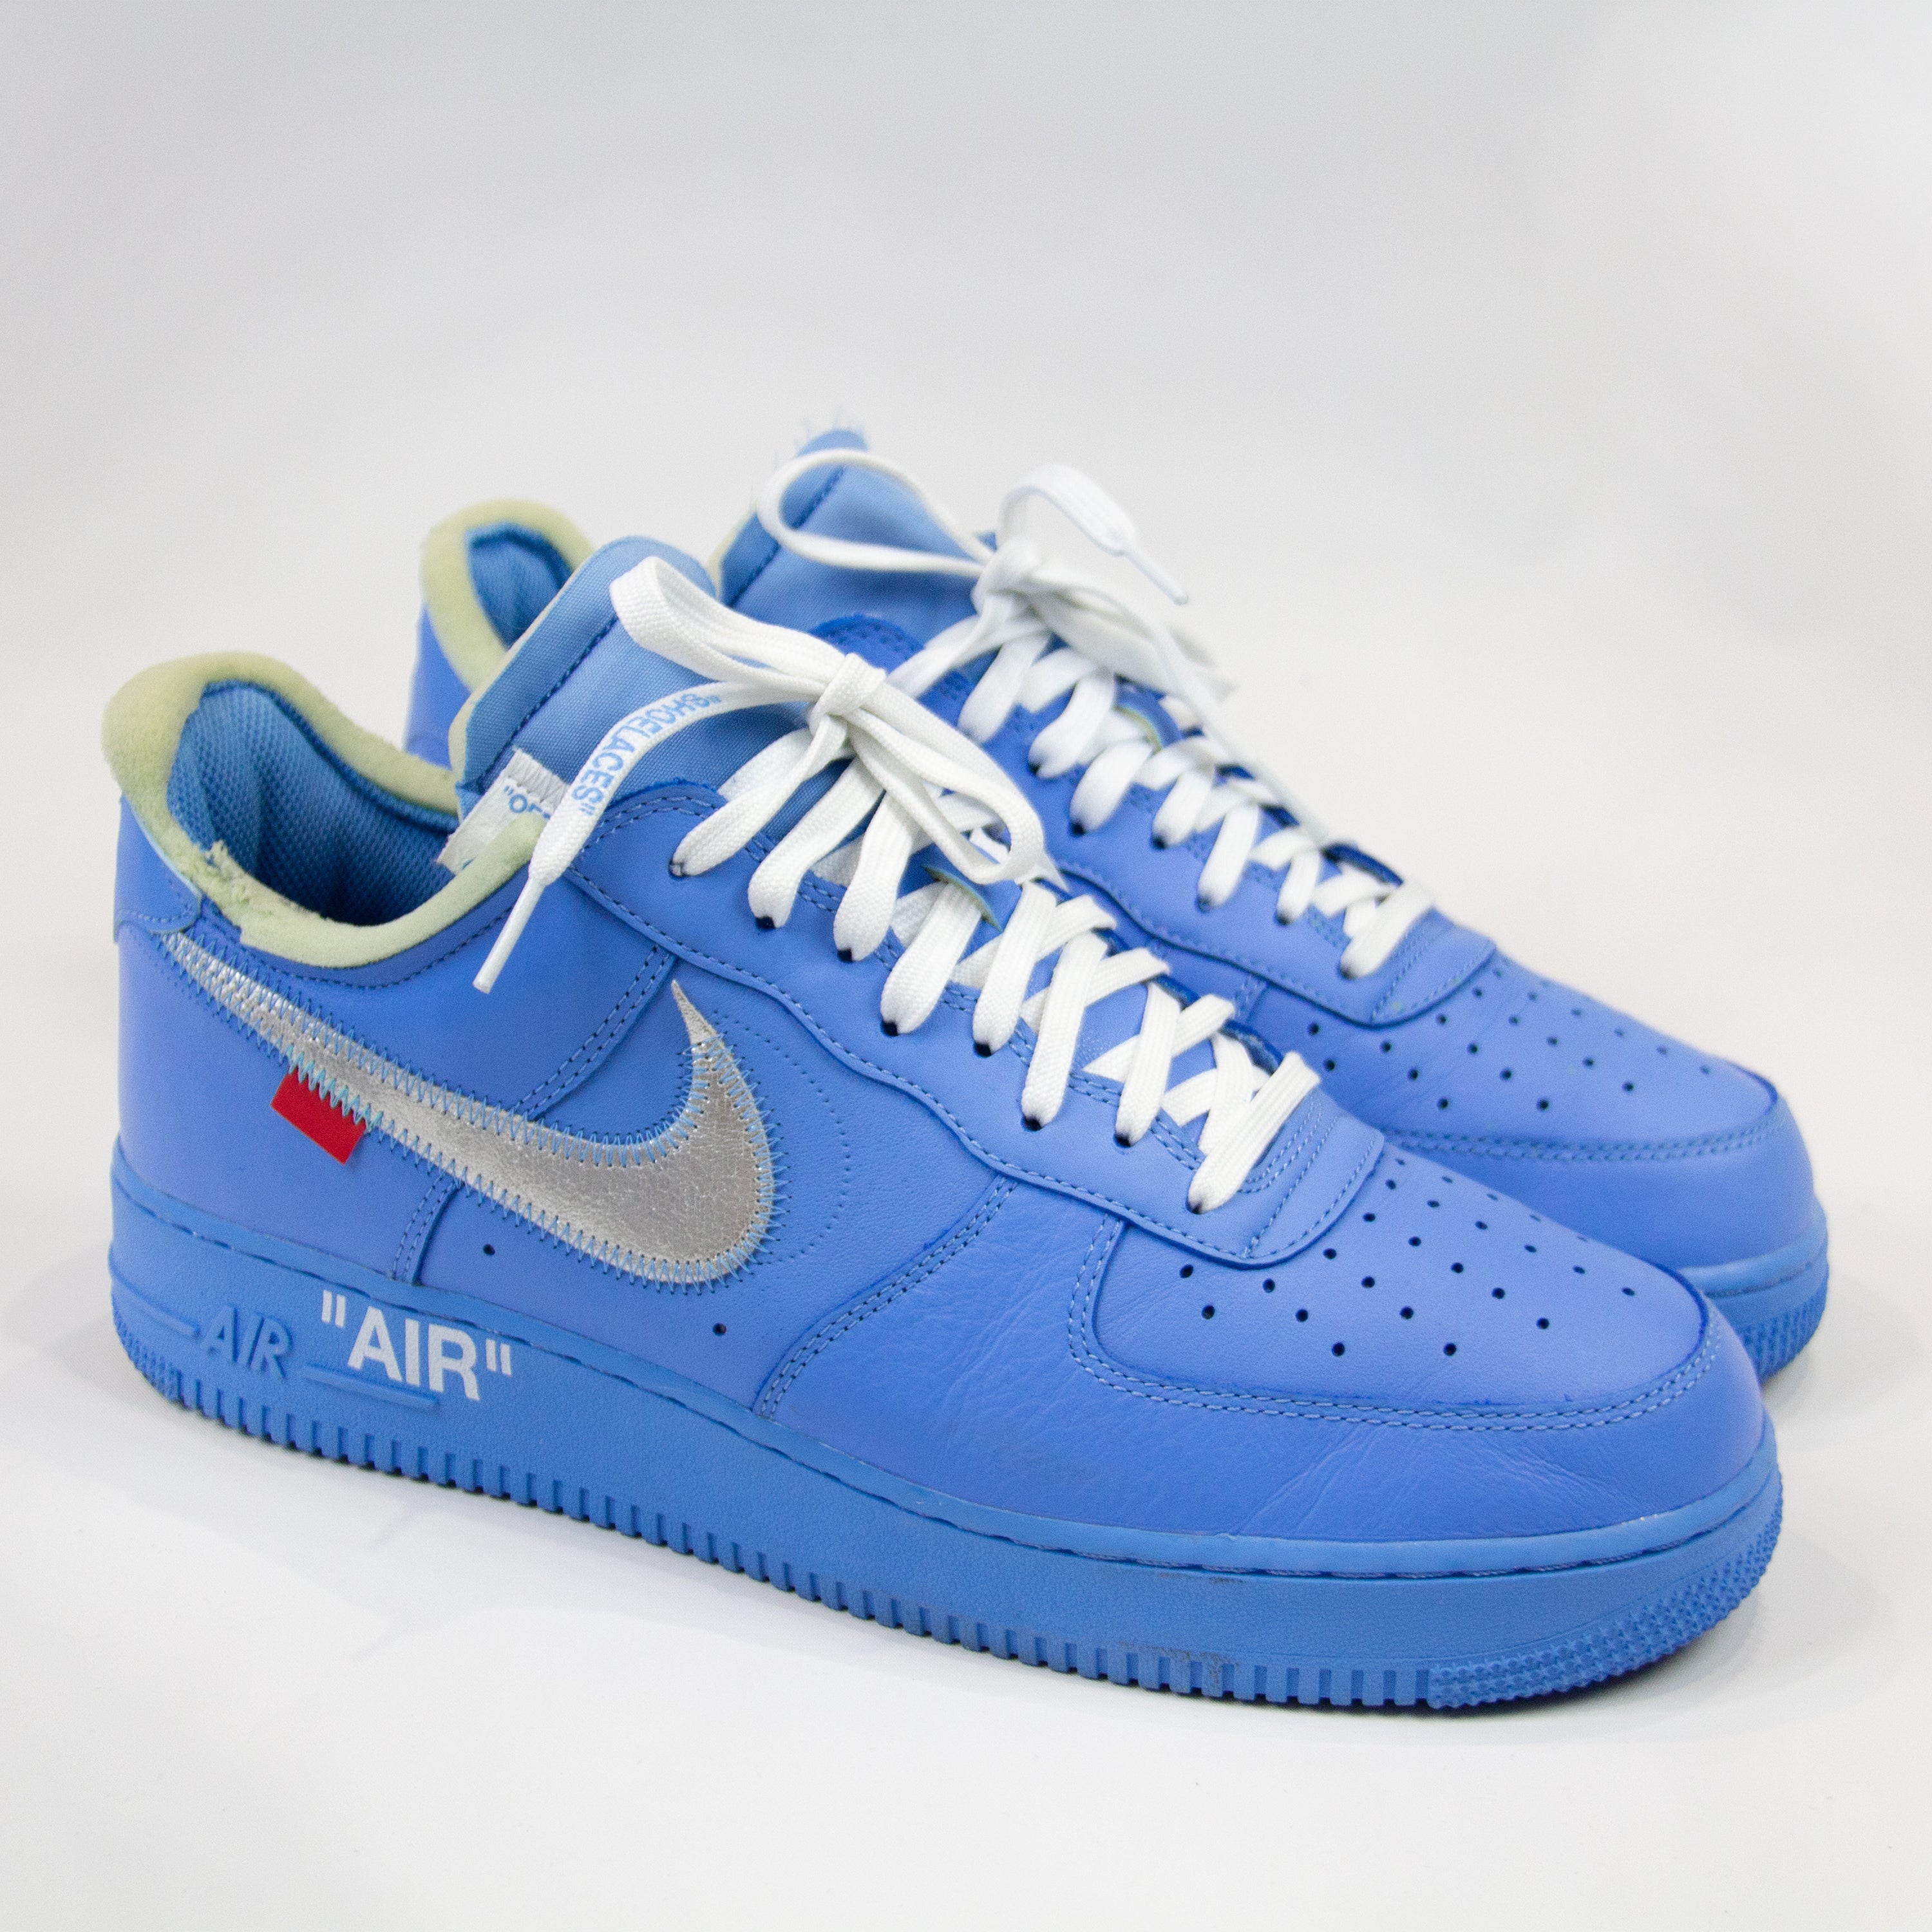 Air Force 1 Low Nike x OFF-White - MCA Sneakers/Shoes CI1173-400 (US 9)